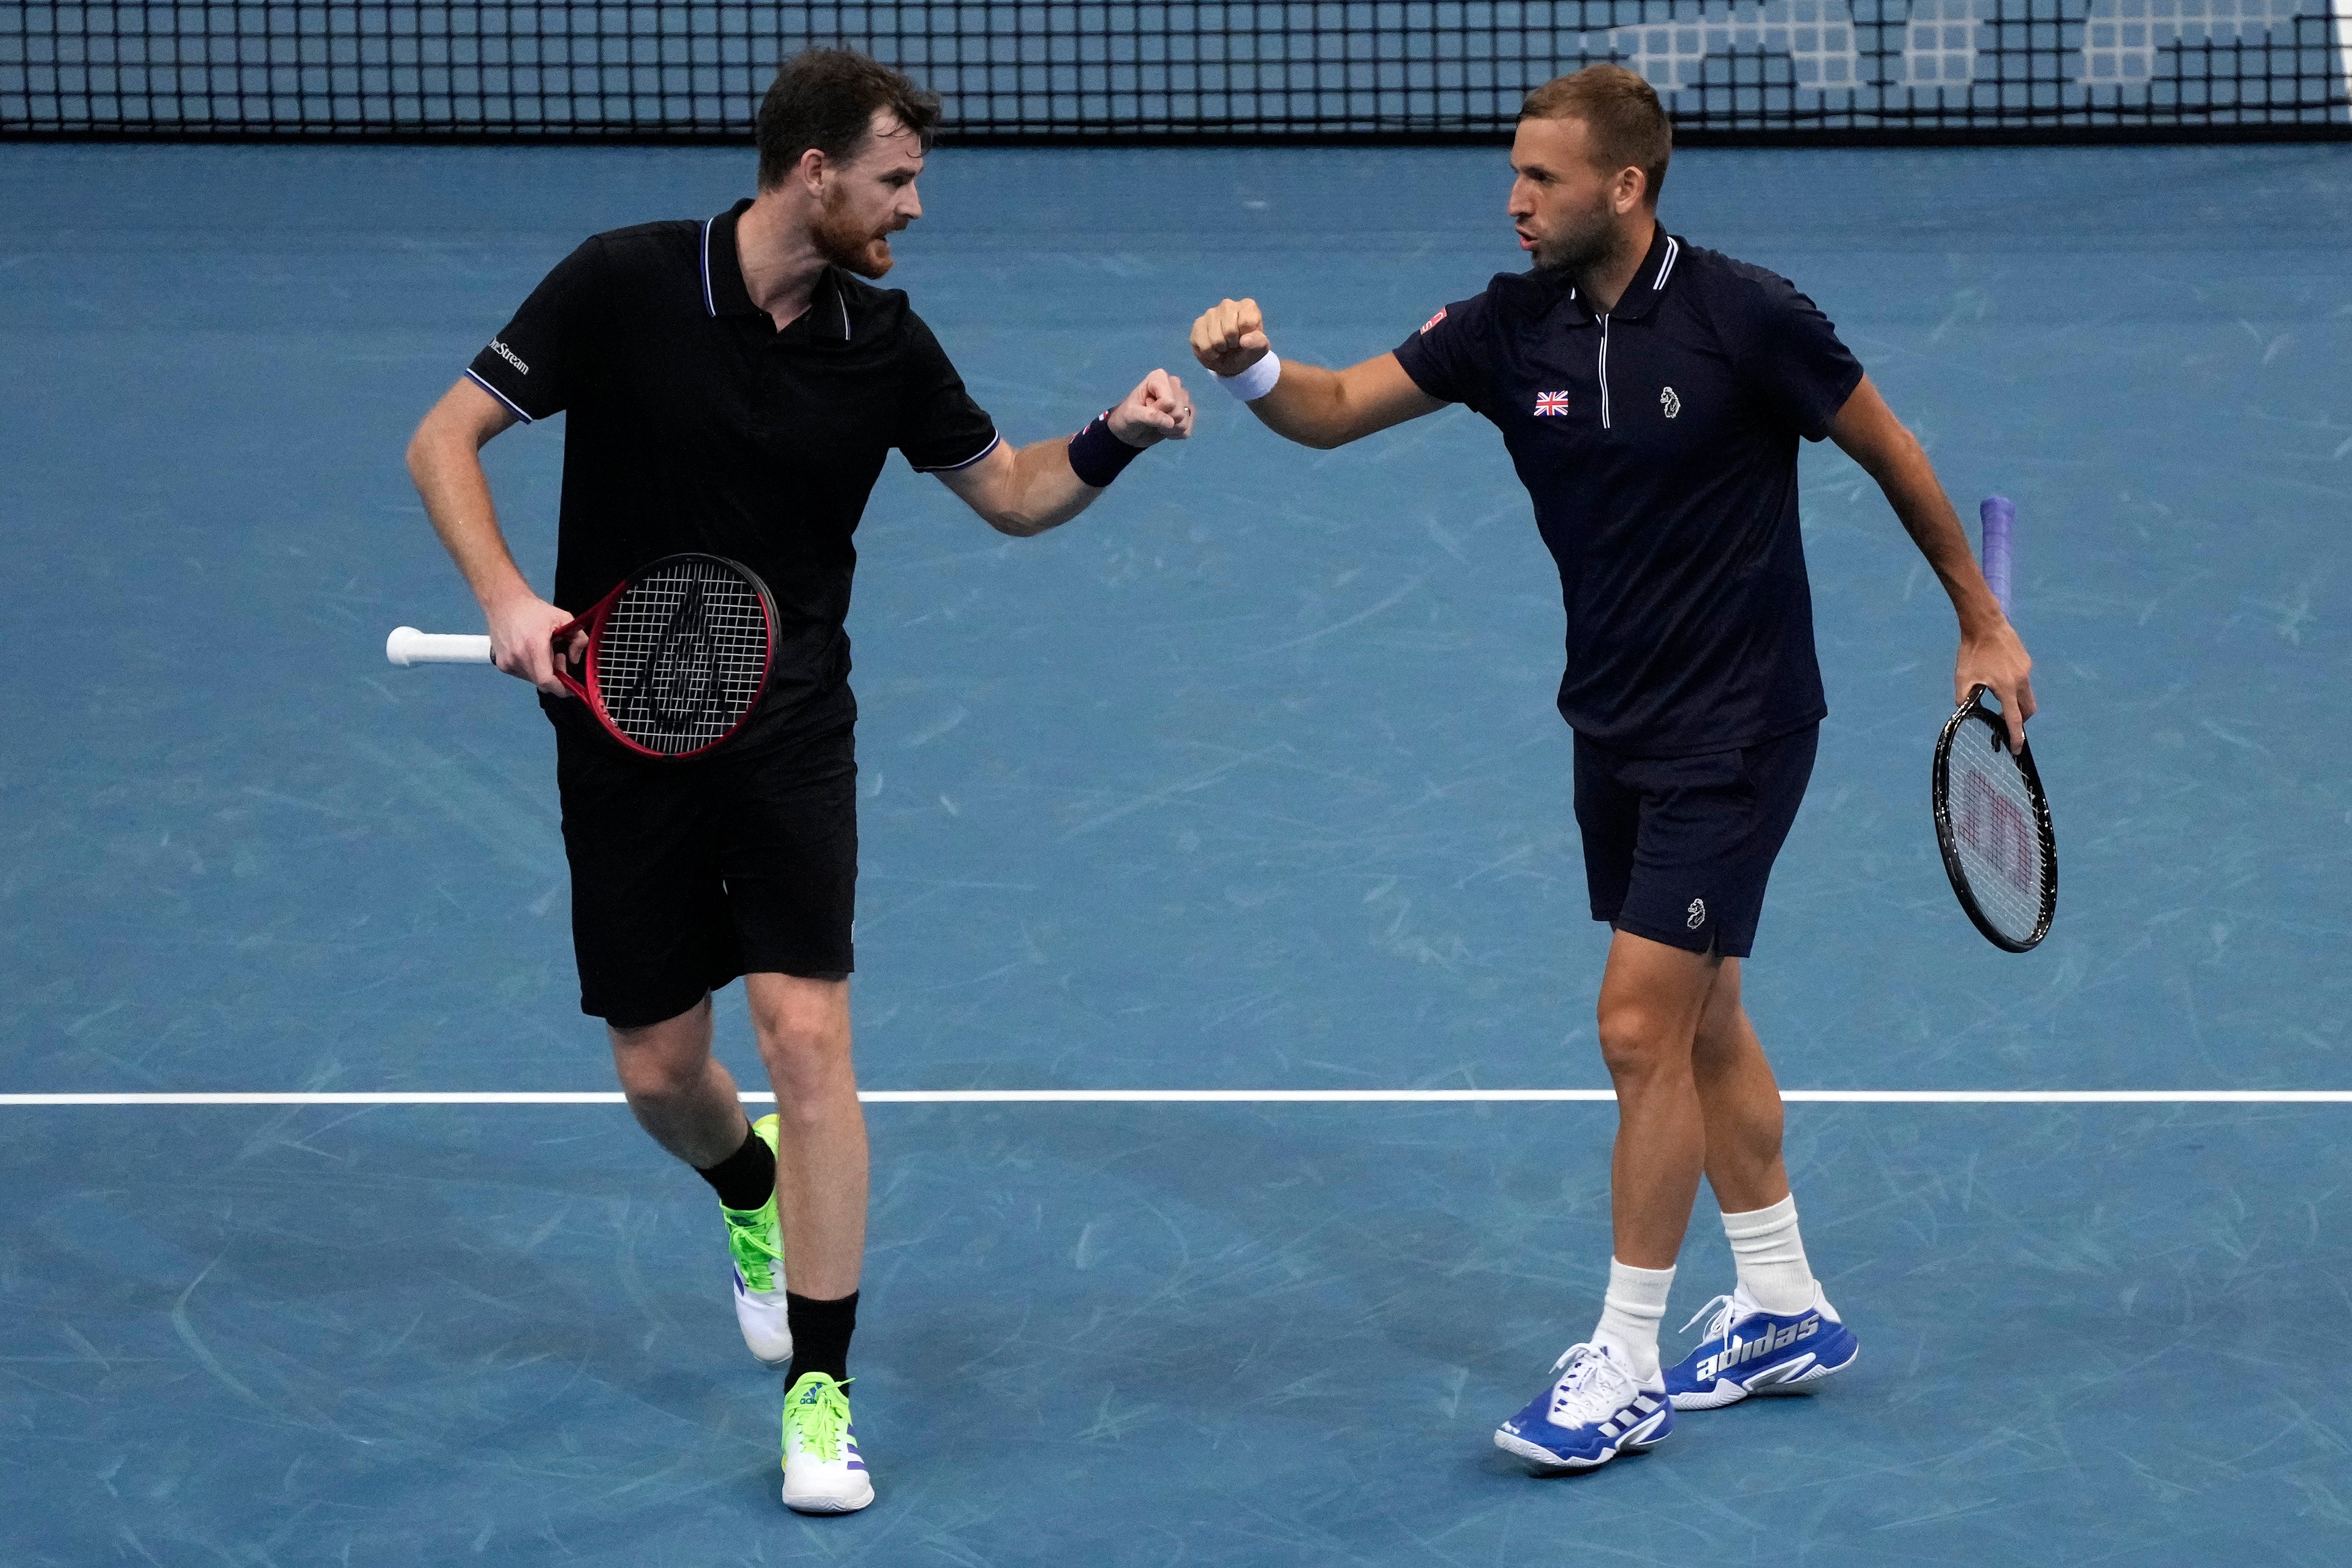 Dan Evans (right) won in the singles and then alongside Jamie Murray (left) in the doubles as Great Britain beat Germany 2-1 in the ATP Cup in Sydney (Rick Rycroft/AP).